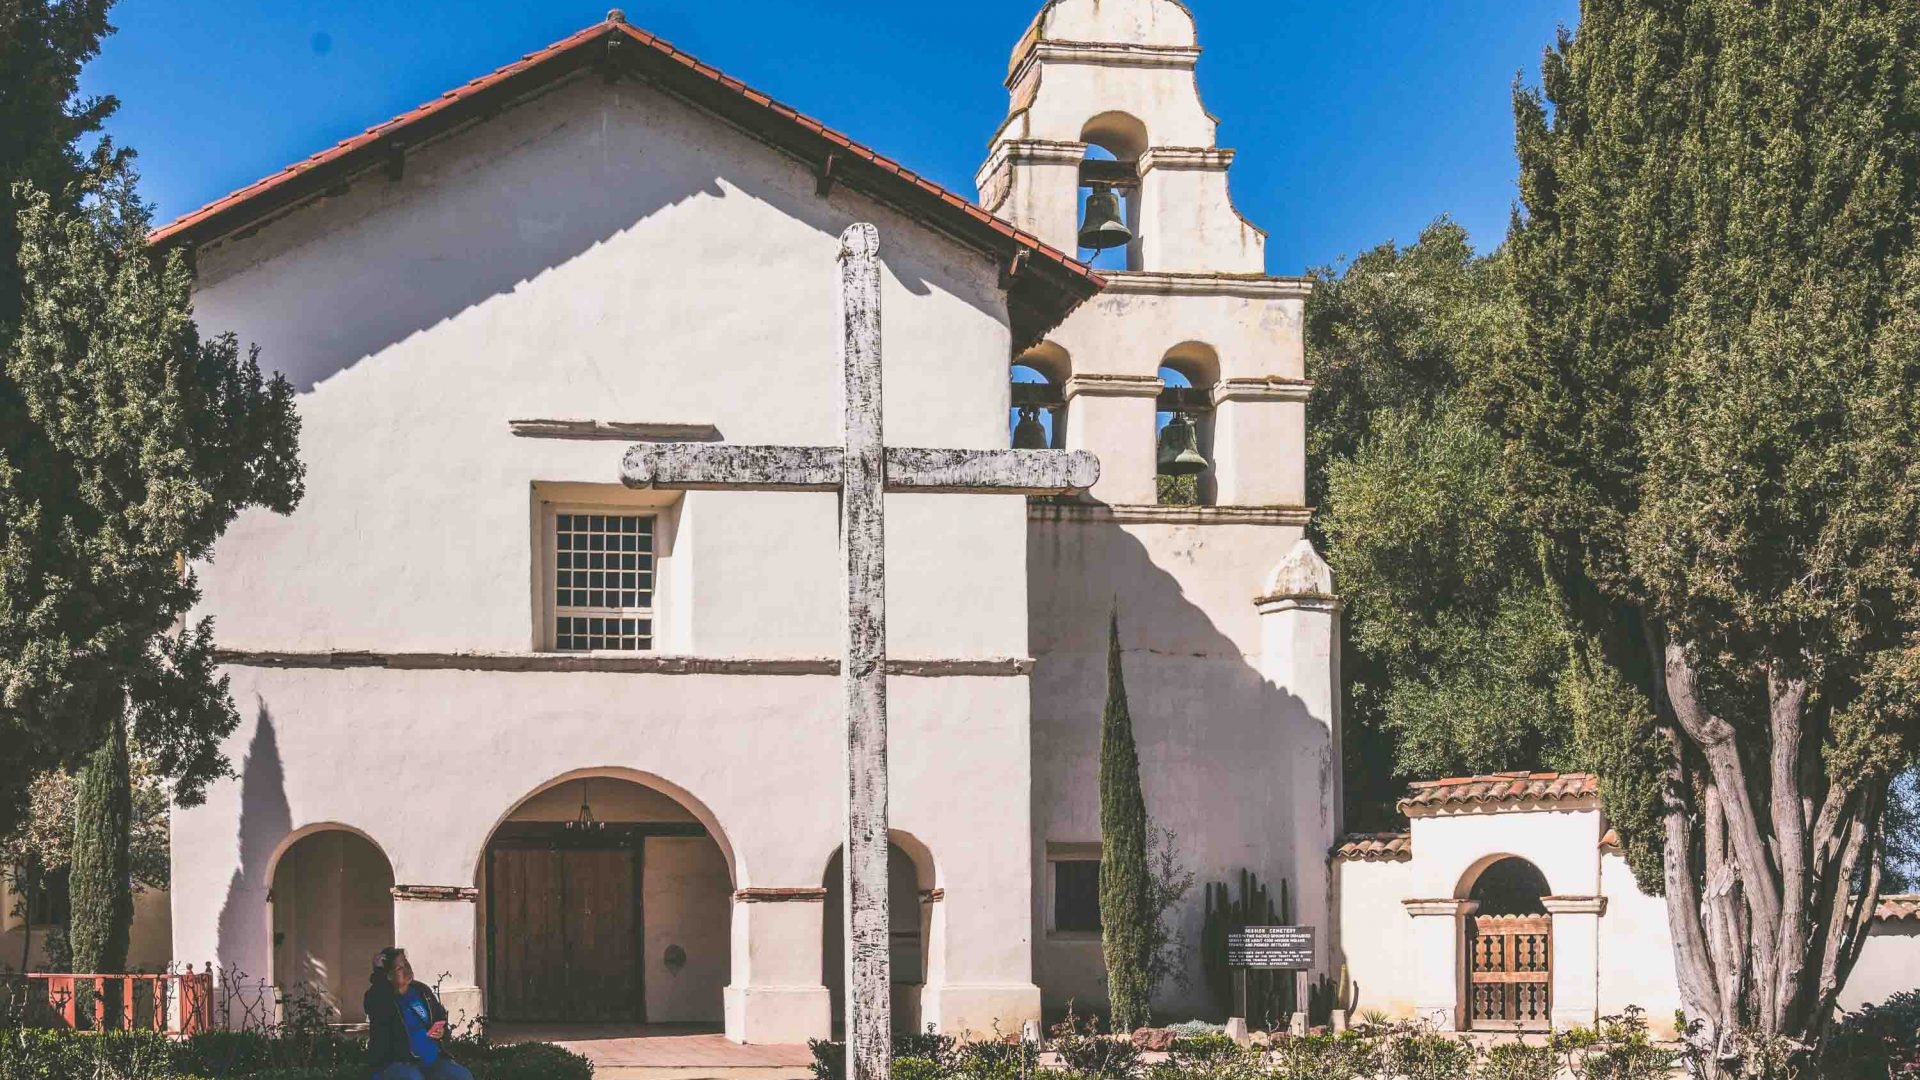 Mission San Juan Bautista in Northern California, the place where Madeleine plunged to her death not once but twice in Hitchcock's Vertigo.